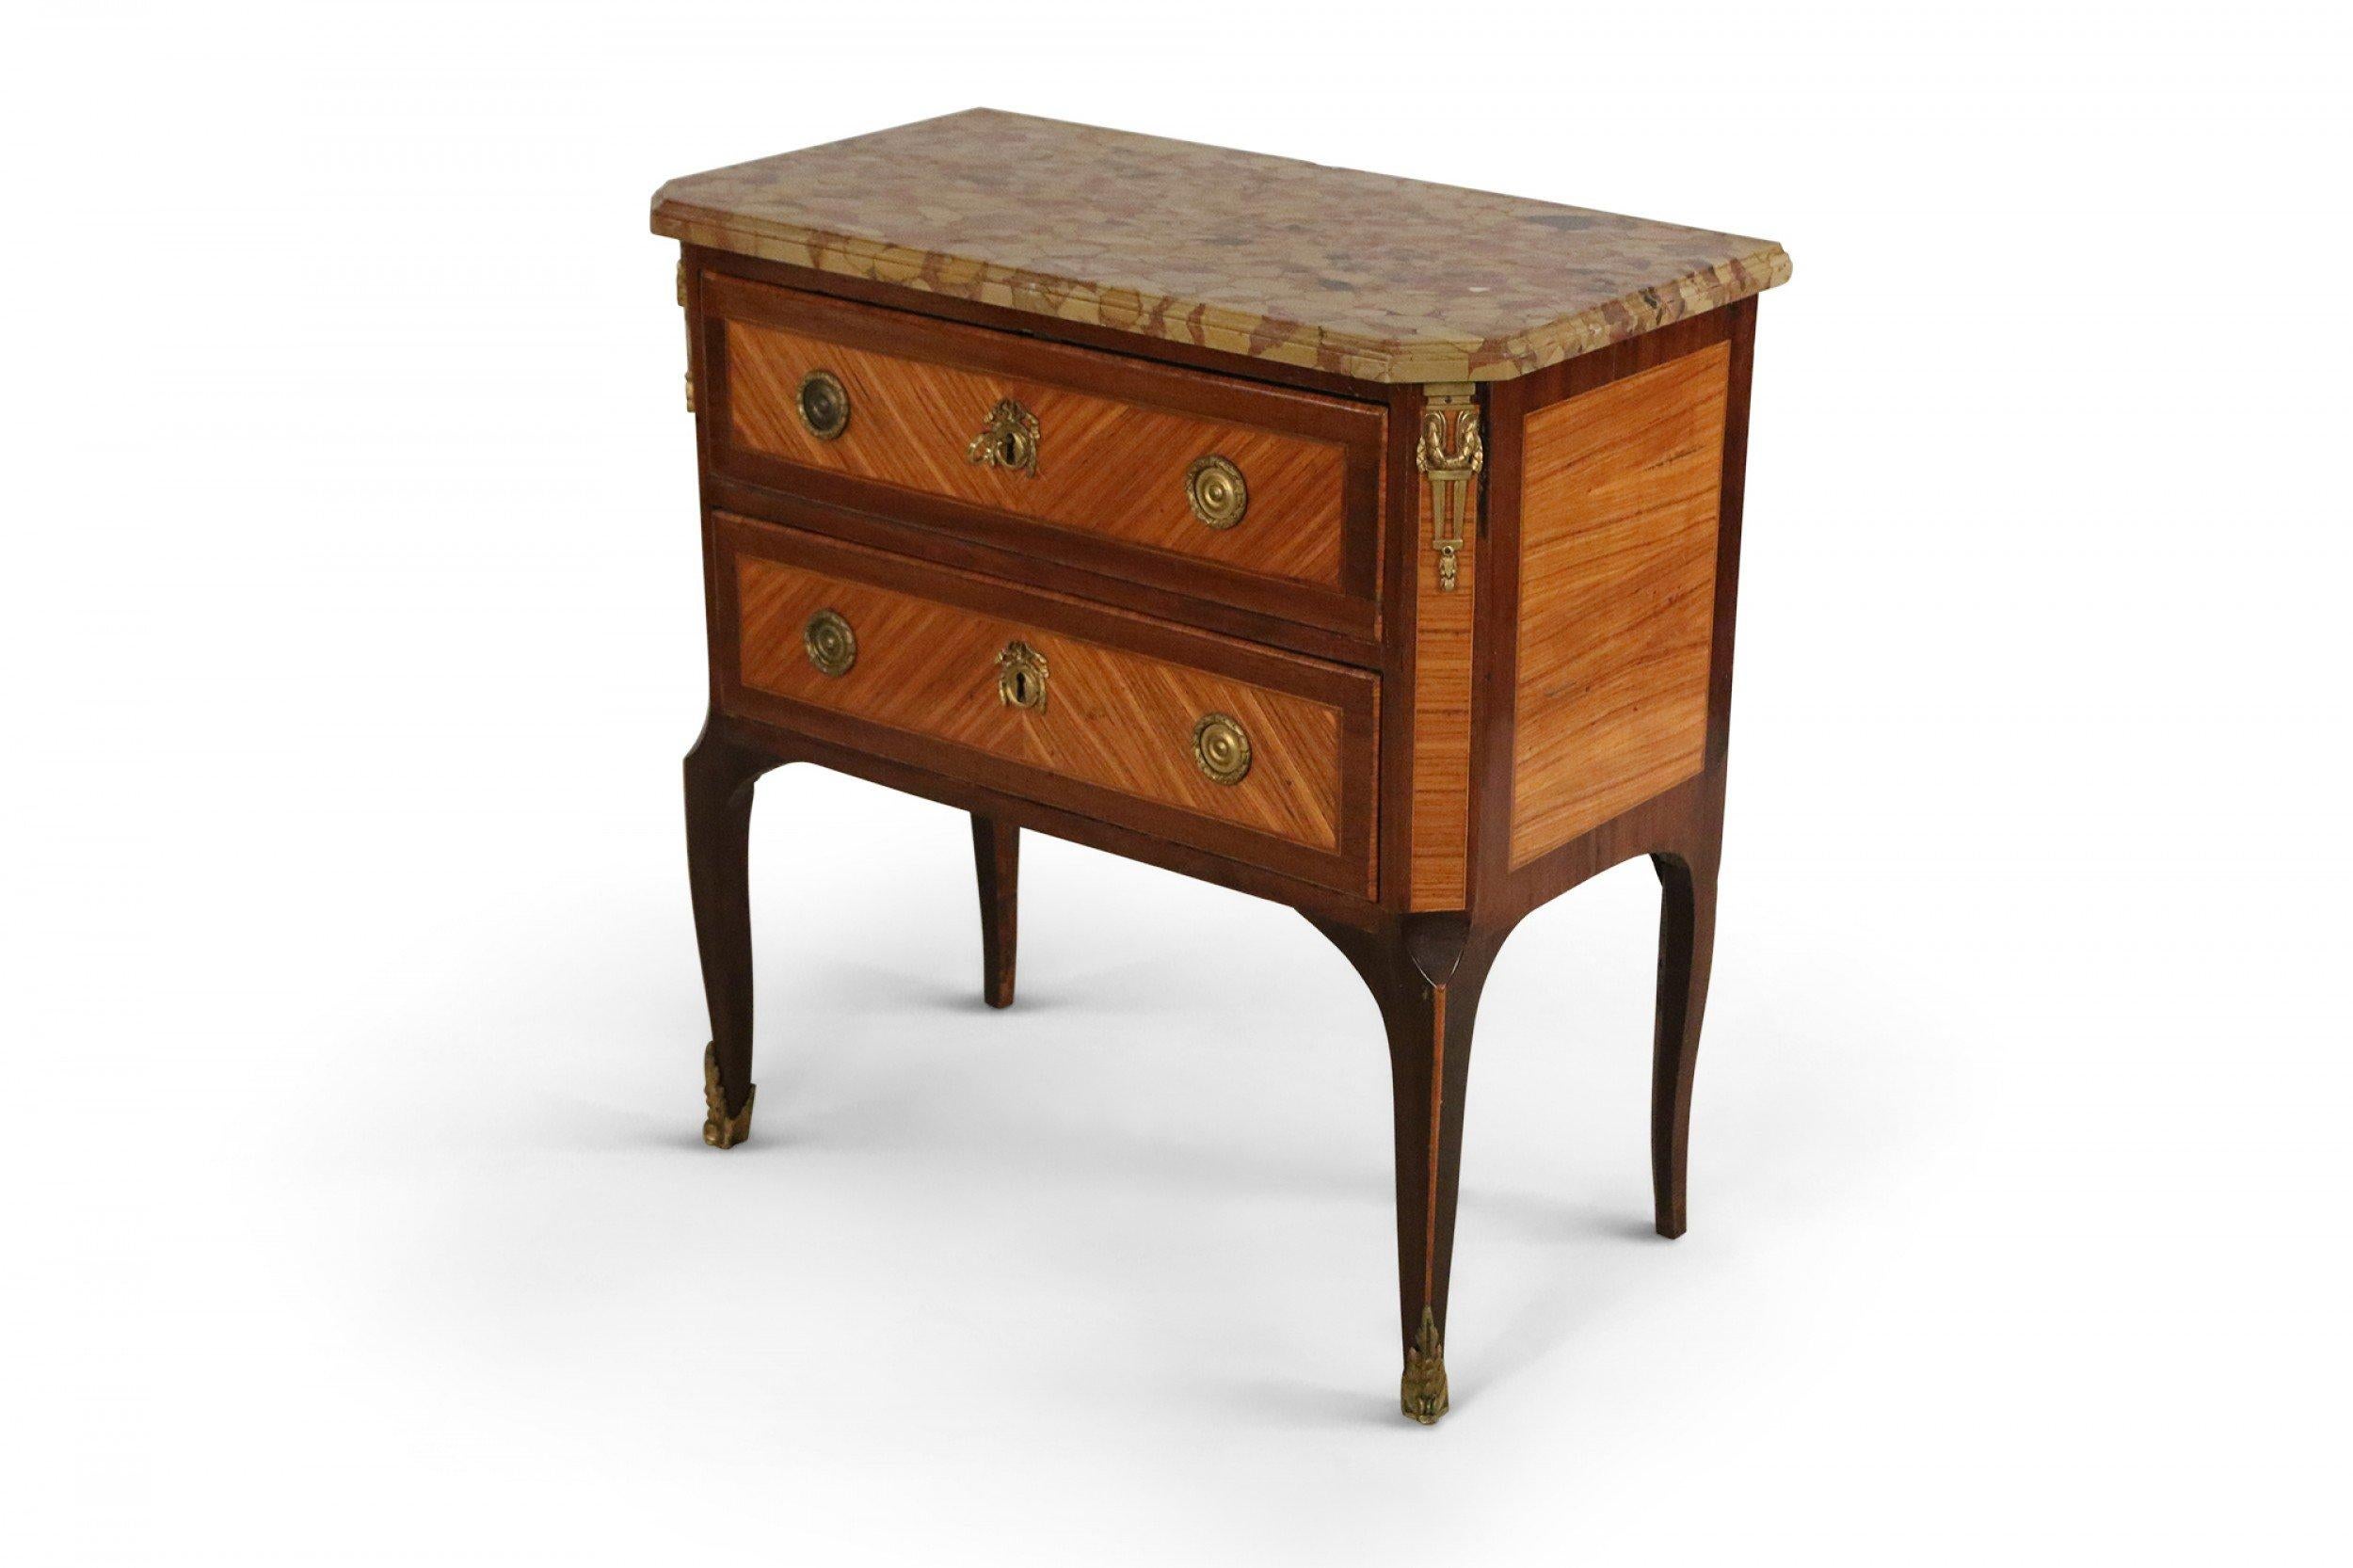 Louis XVI-style (19th century) commode with parquetry veneer, a beige marble top, two drawers with brass hardware, and bronze corner embellishments.